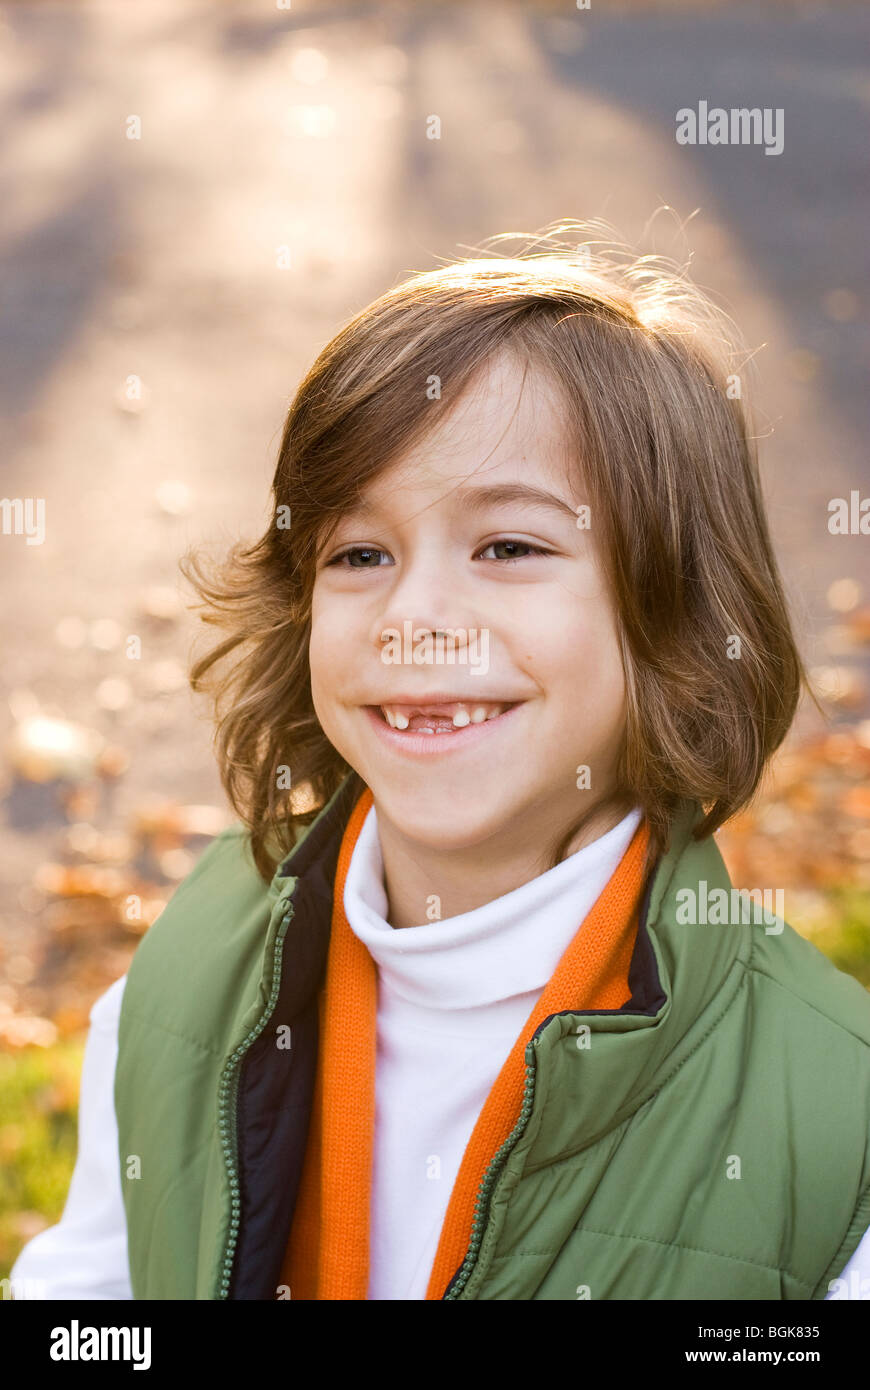 boy smiling with missing teeth Stock Photo